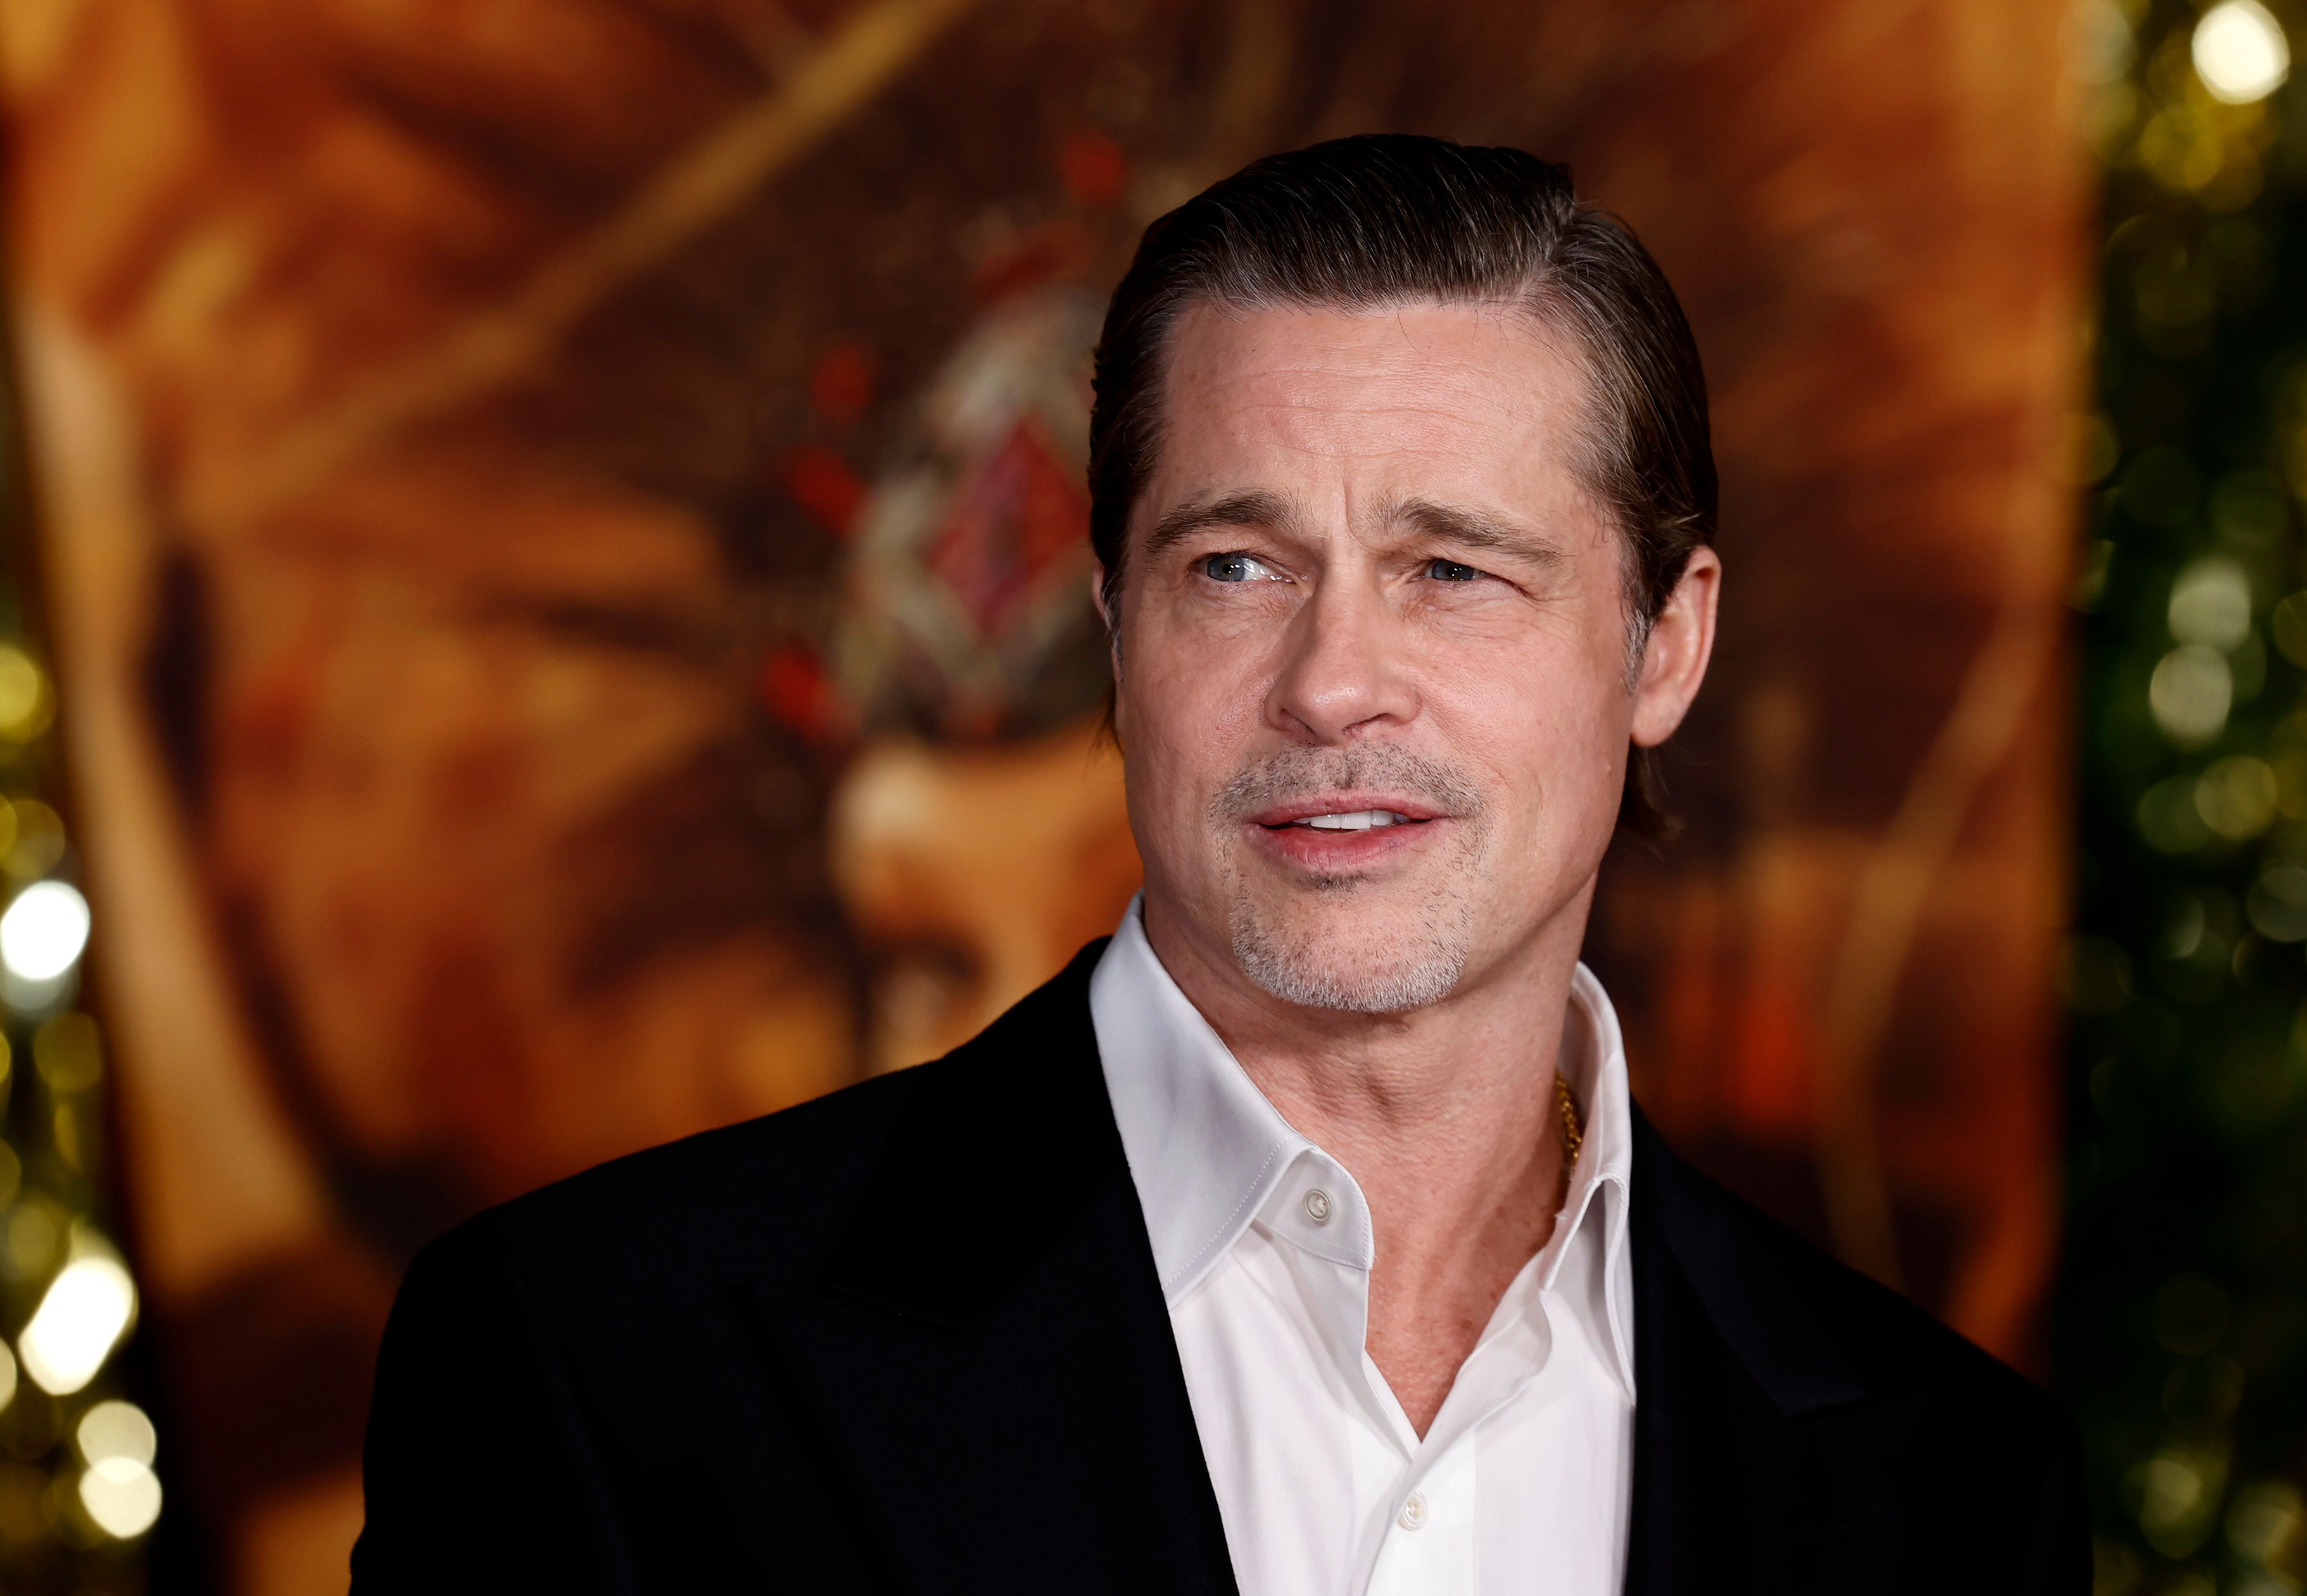 Courtney Love Says Brad Pitt Got Her Fired From 'Fight Club'